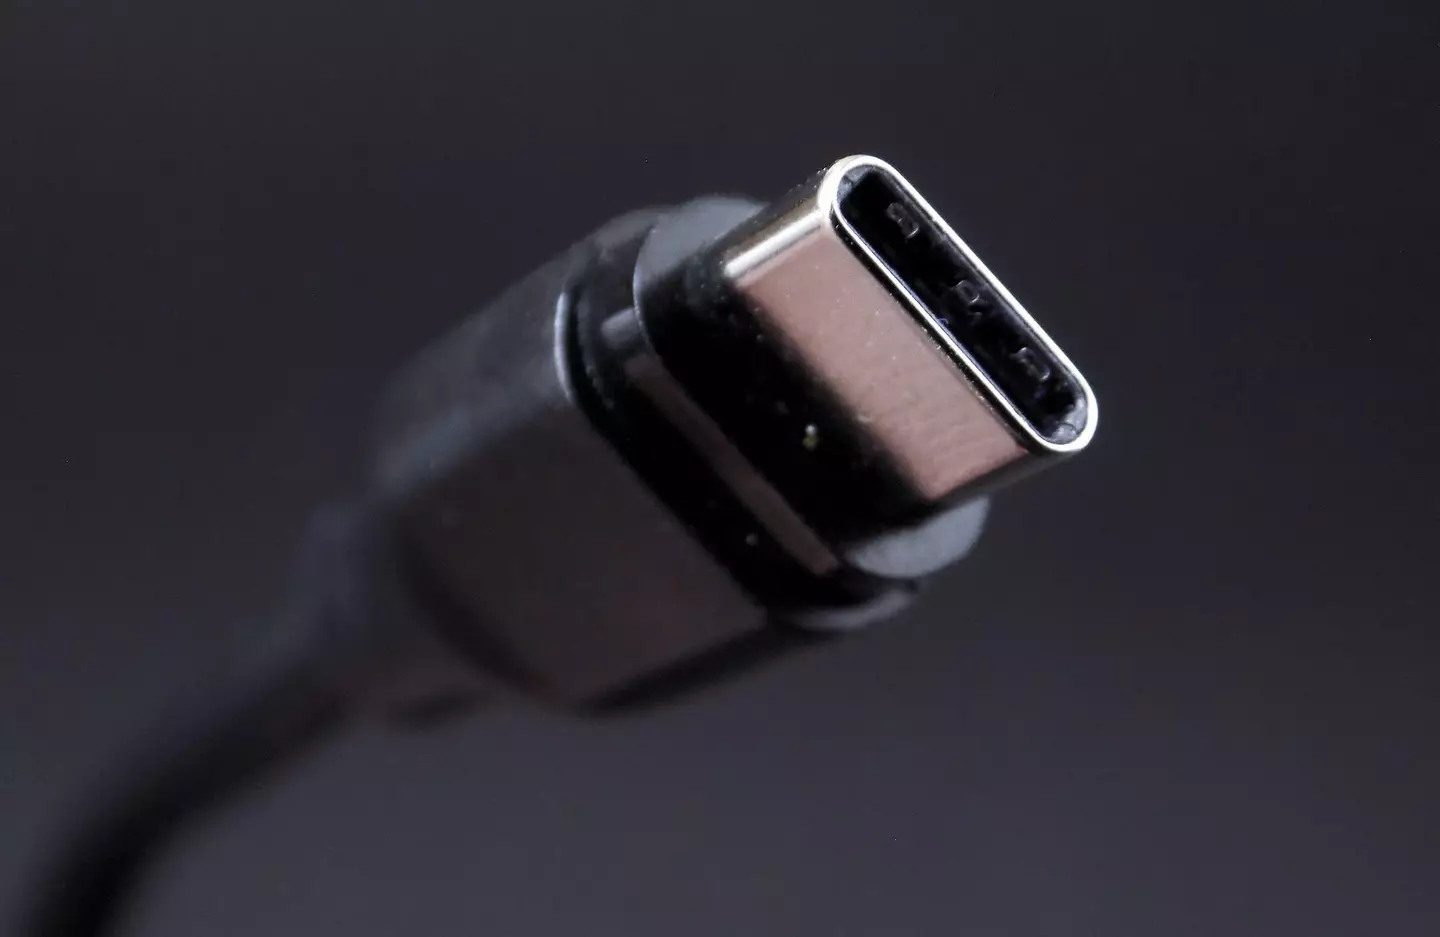 USB-Cs would replace Apple's Lightning chargers.